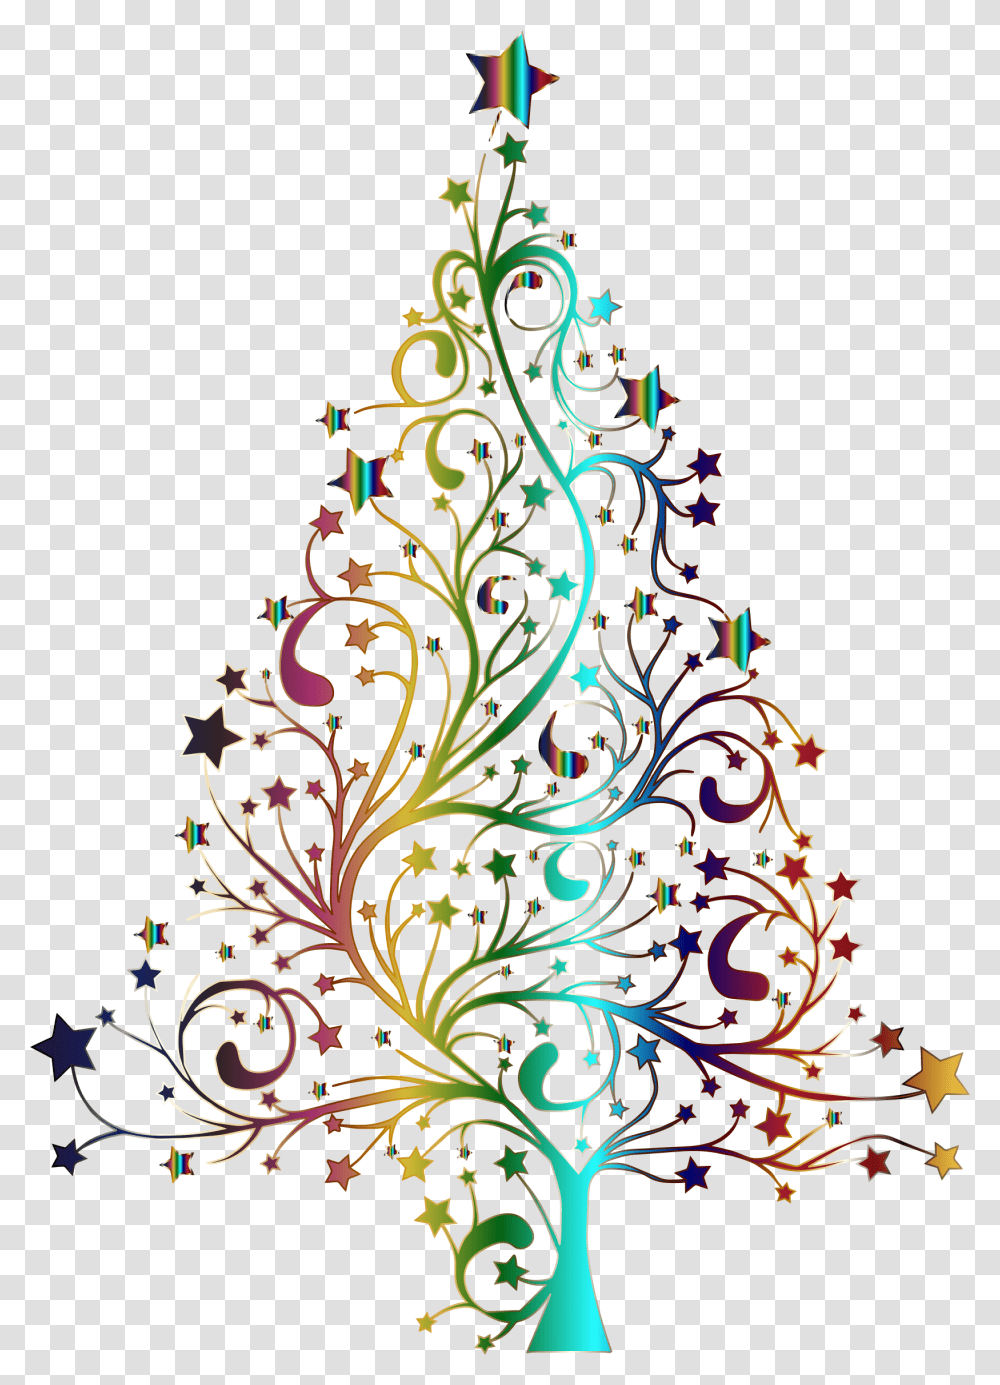 Starry Christmas Tree Prismatic No Background Clip Christmas Images No Background, Floral Design, Pattern Transparent Png